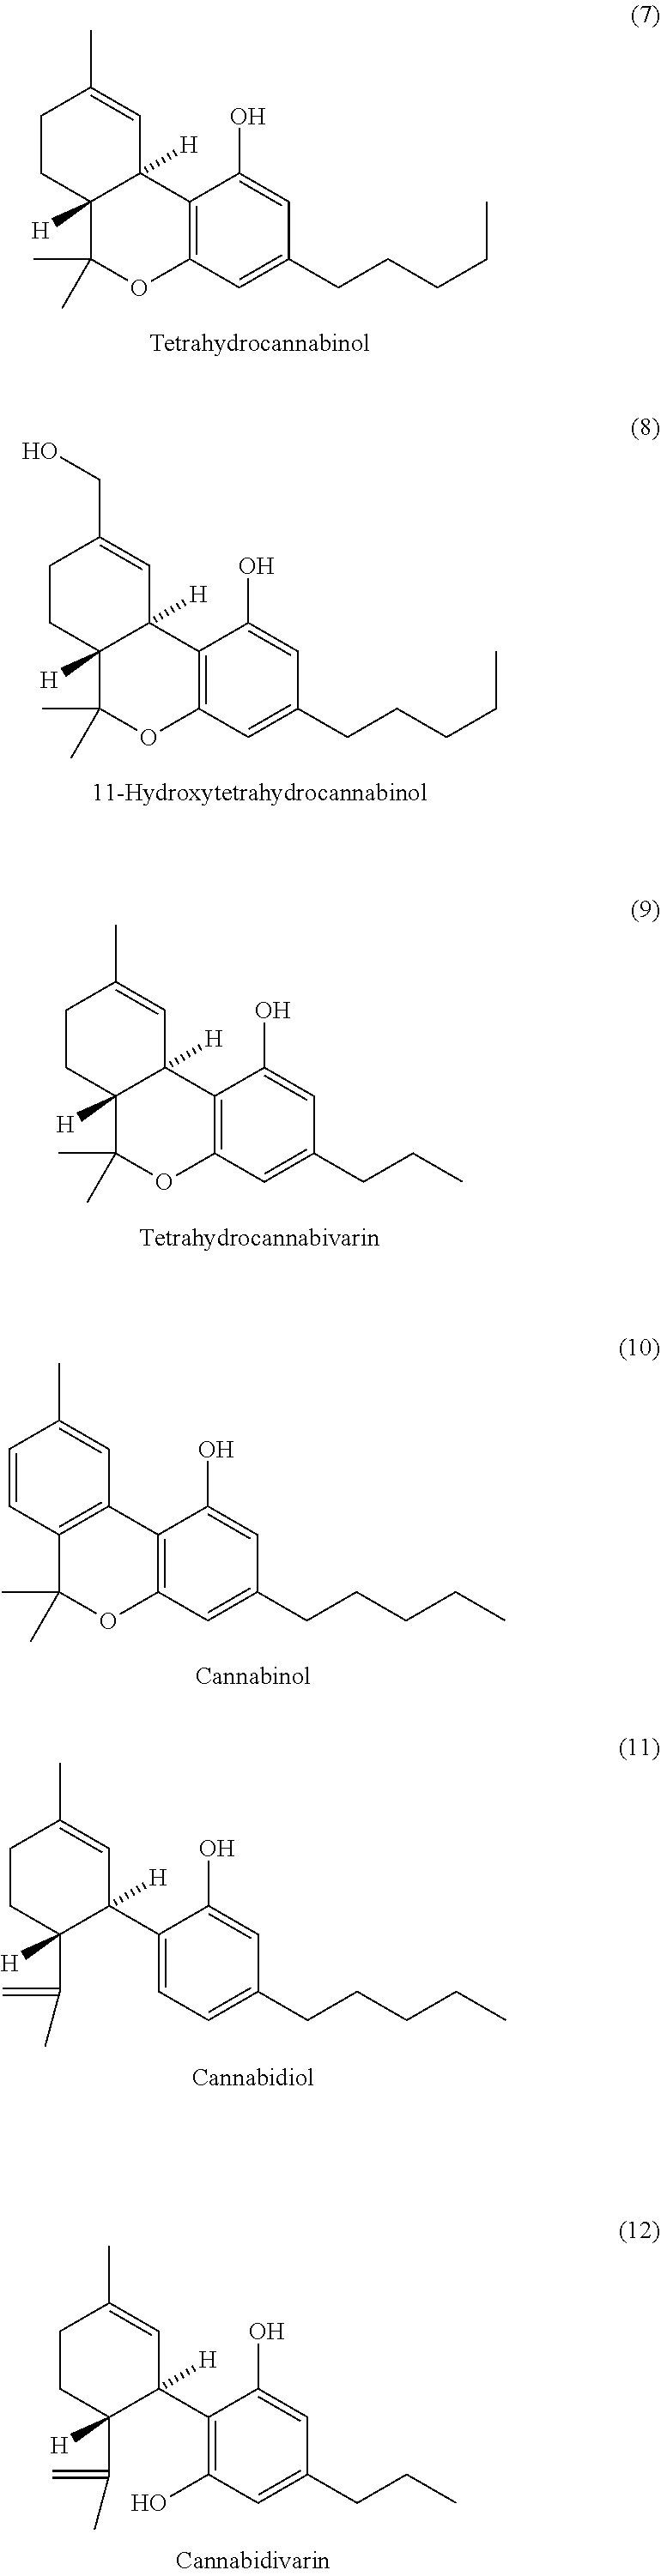 Process for the Production of Cannabinoids